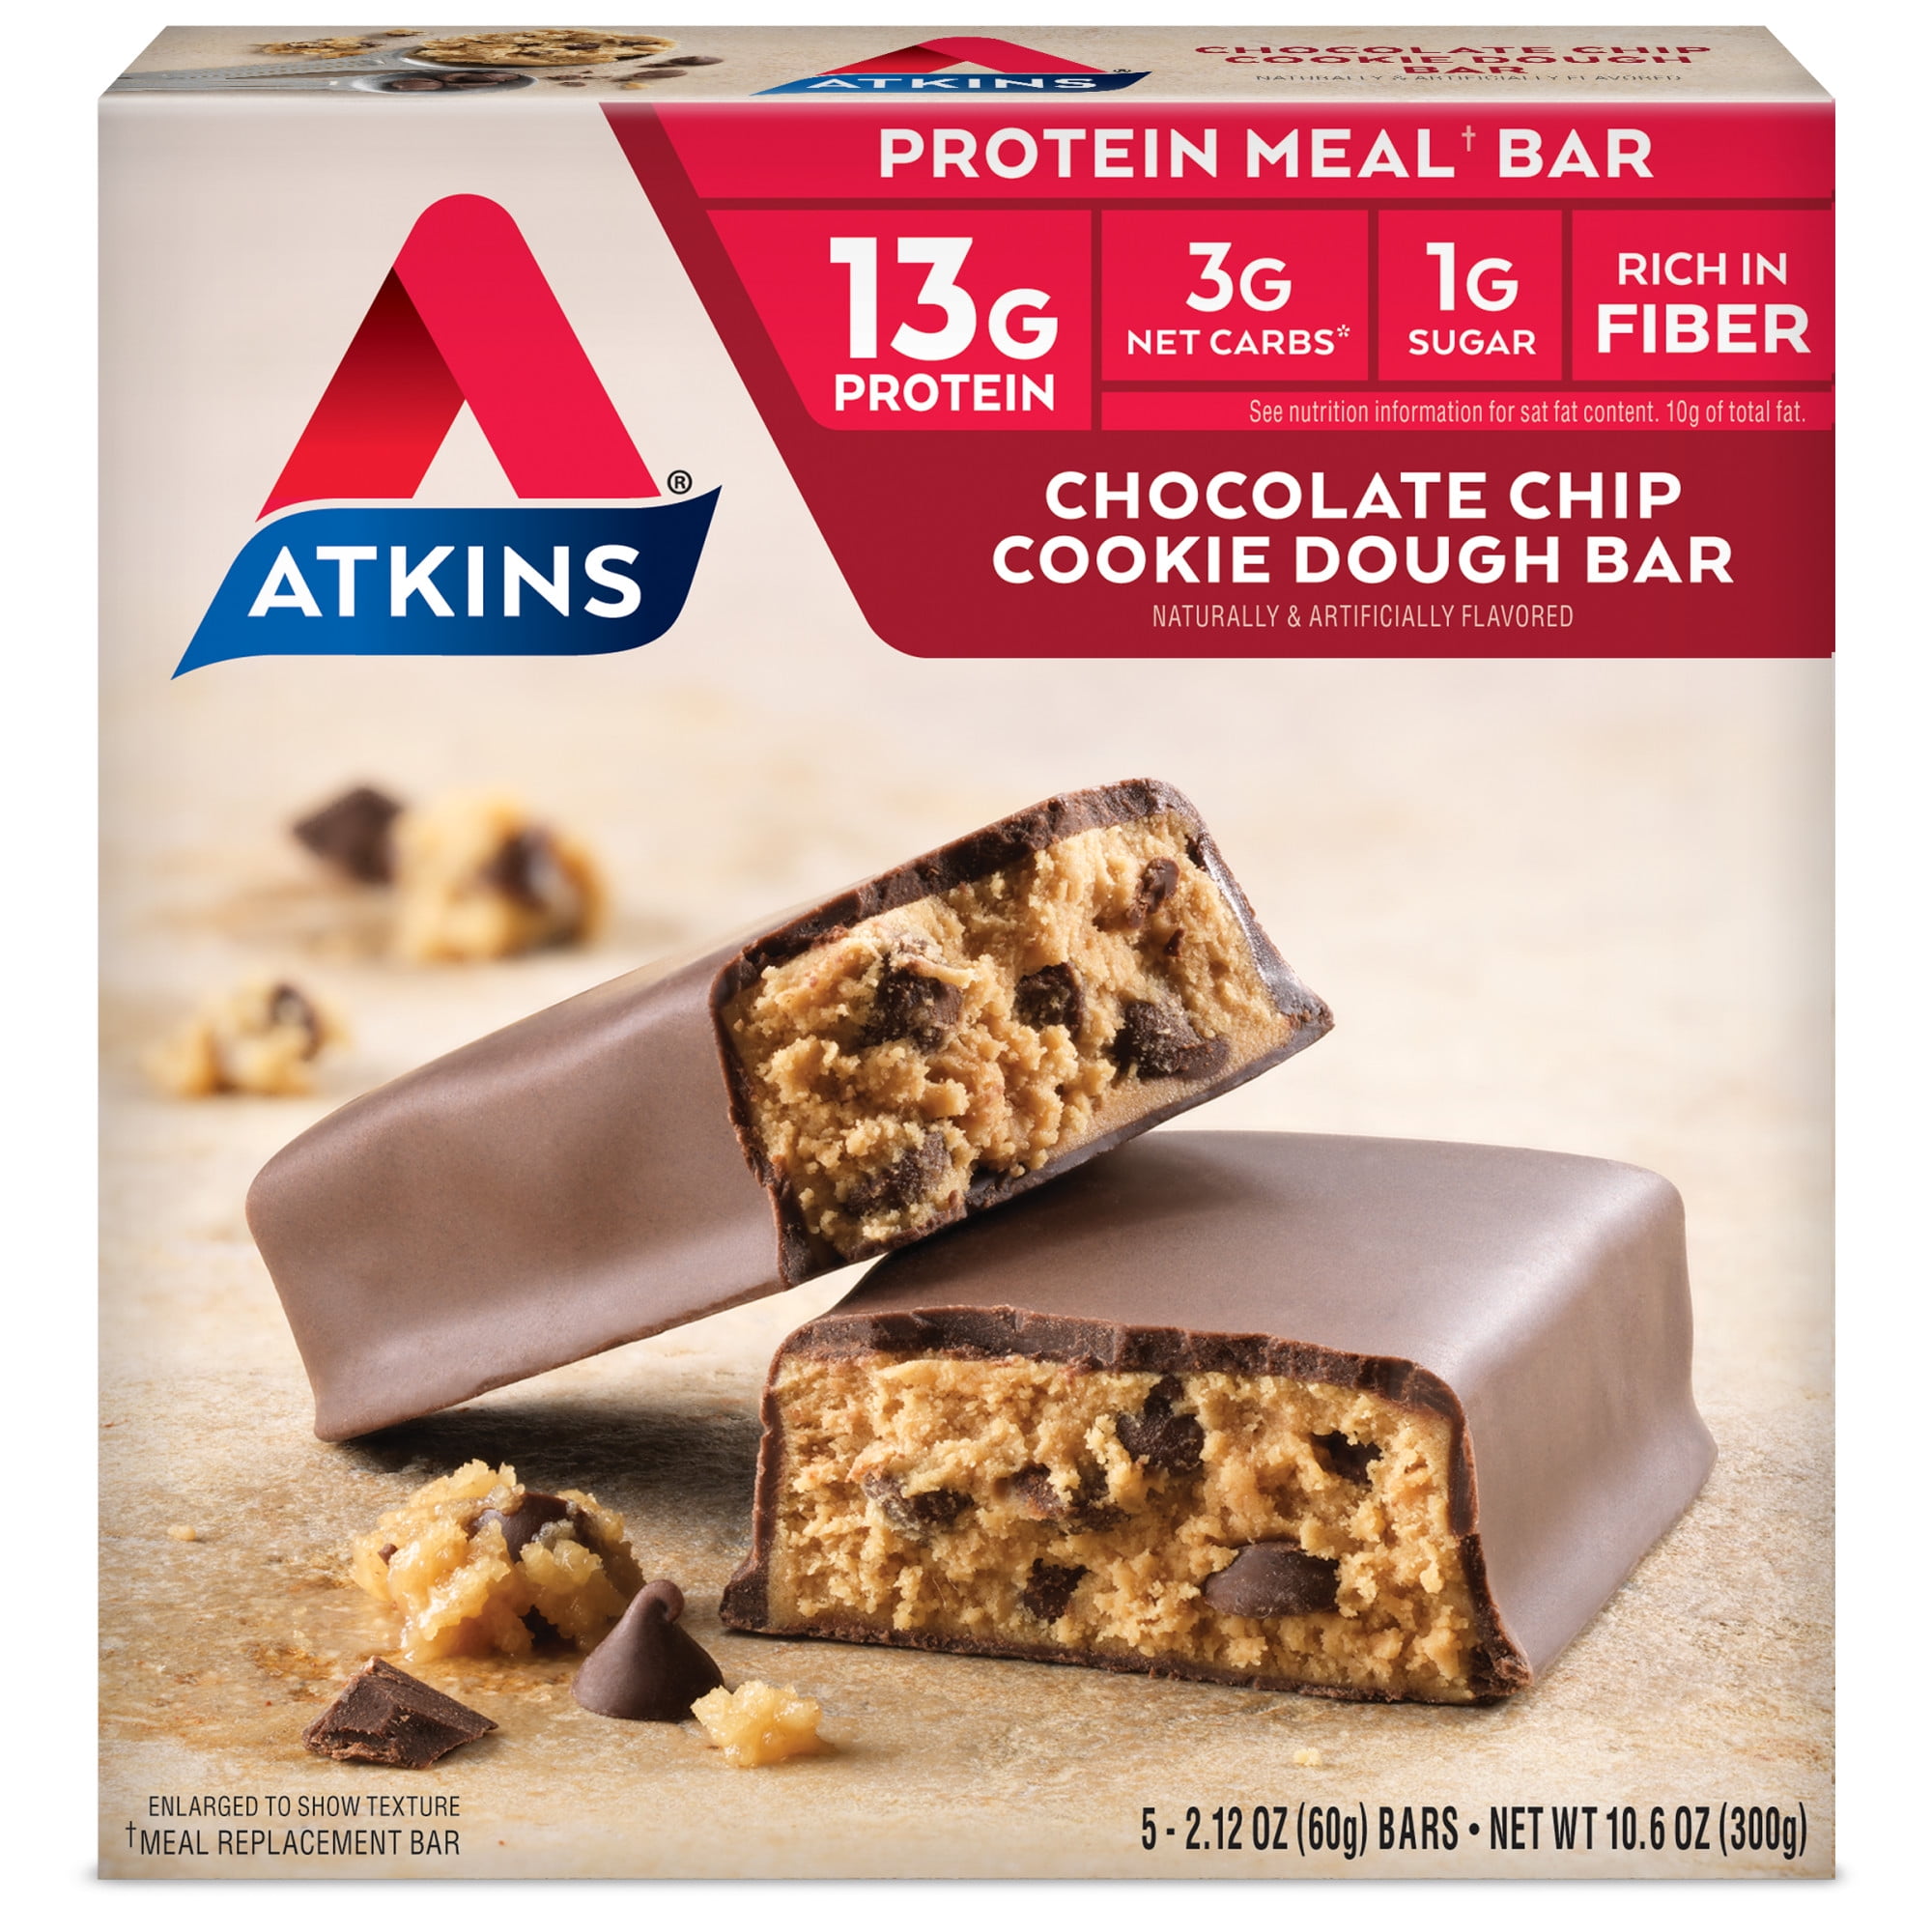 Atkins Protein-Rich Meal Bar, Chocolate Chip Cookie Dough, Keto Friendly, 5 Count